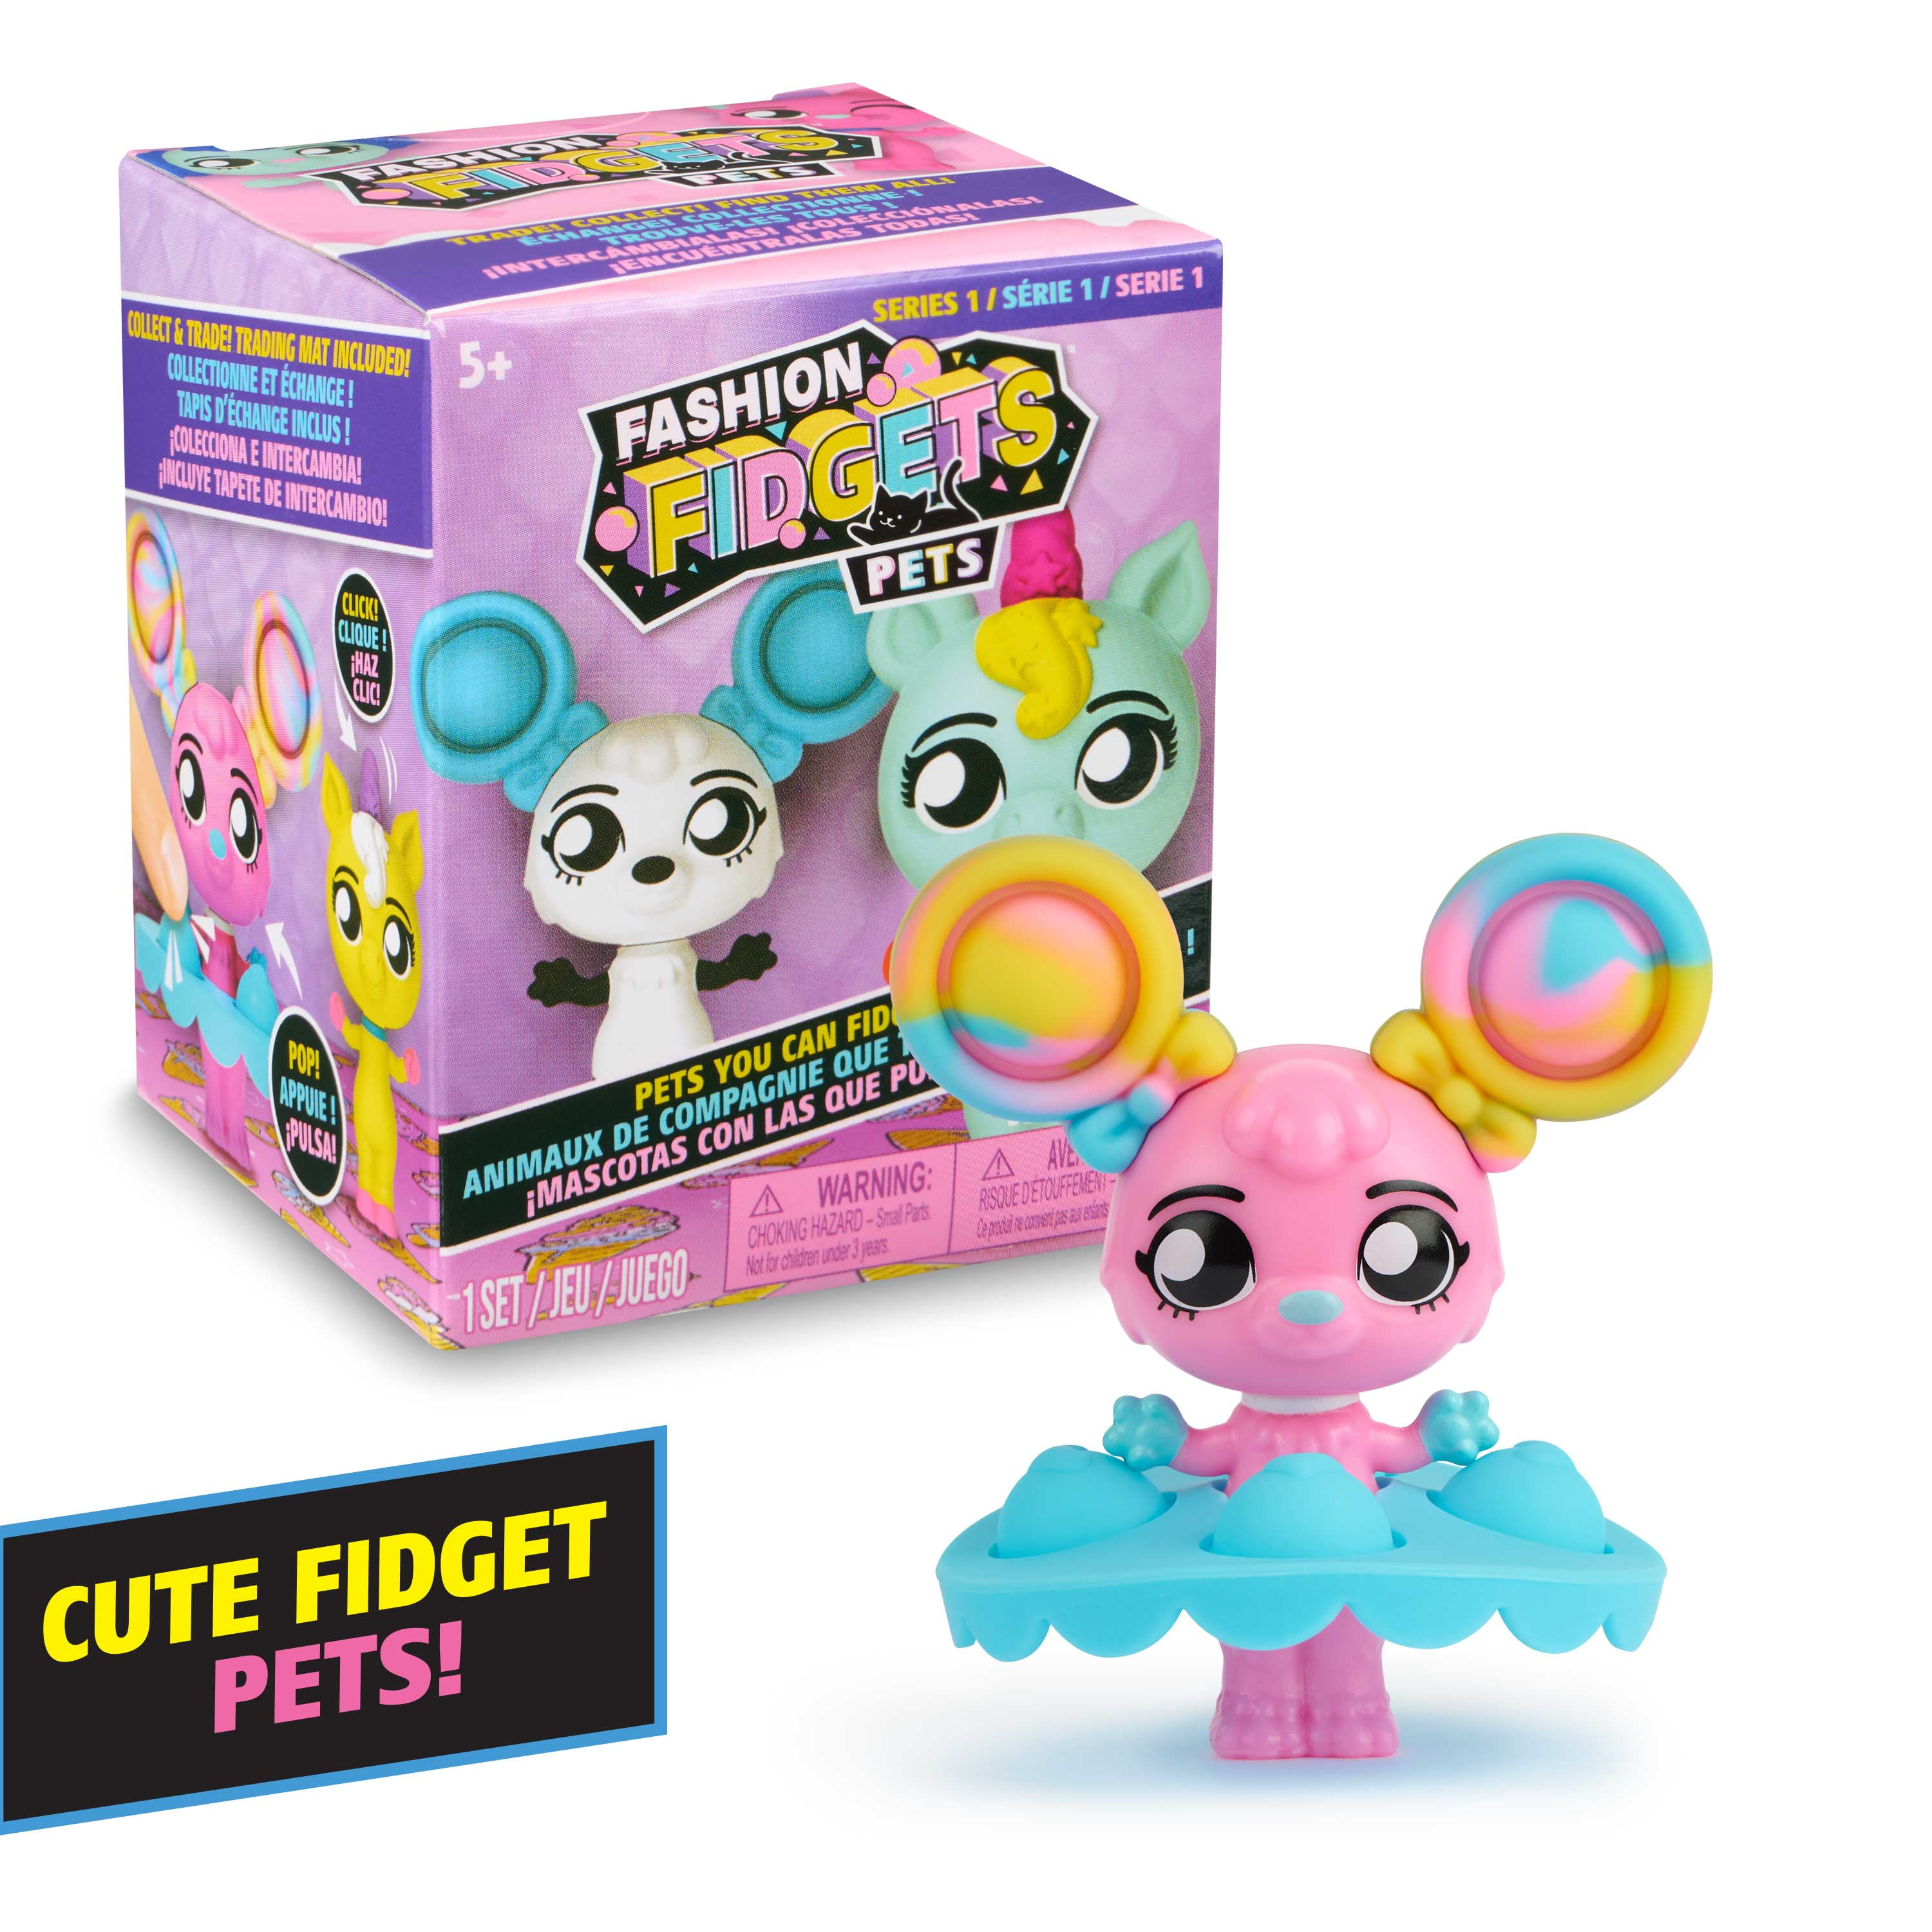 Fashion Fidgets Pets Collectible Pet Doll by WowWee (1 Doll Included), Ages - Walmart.com